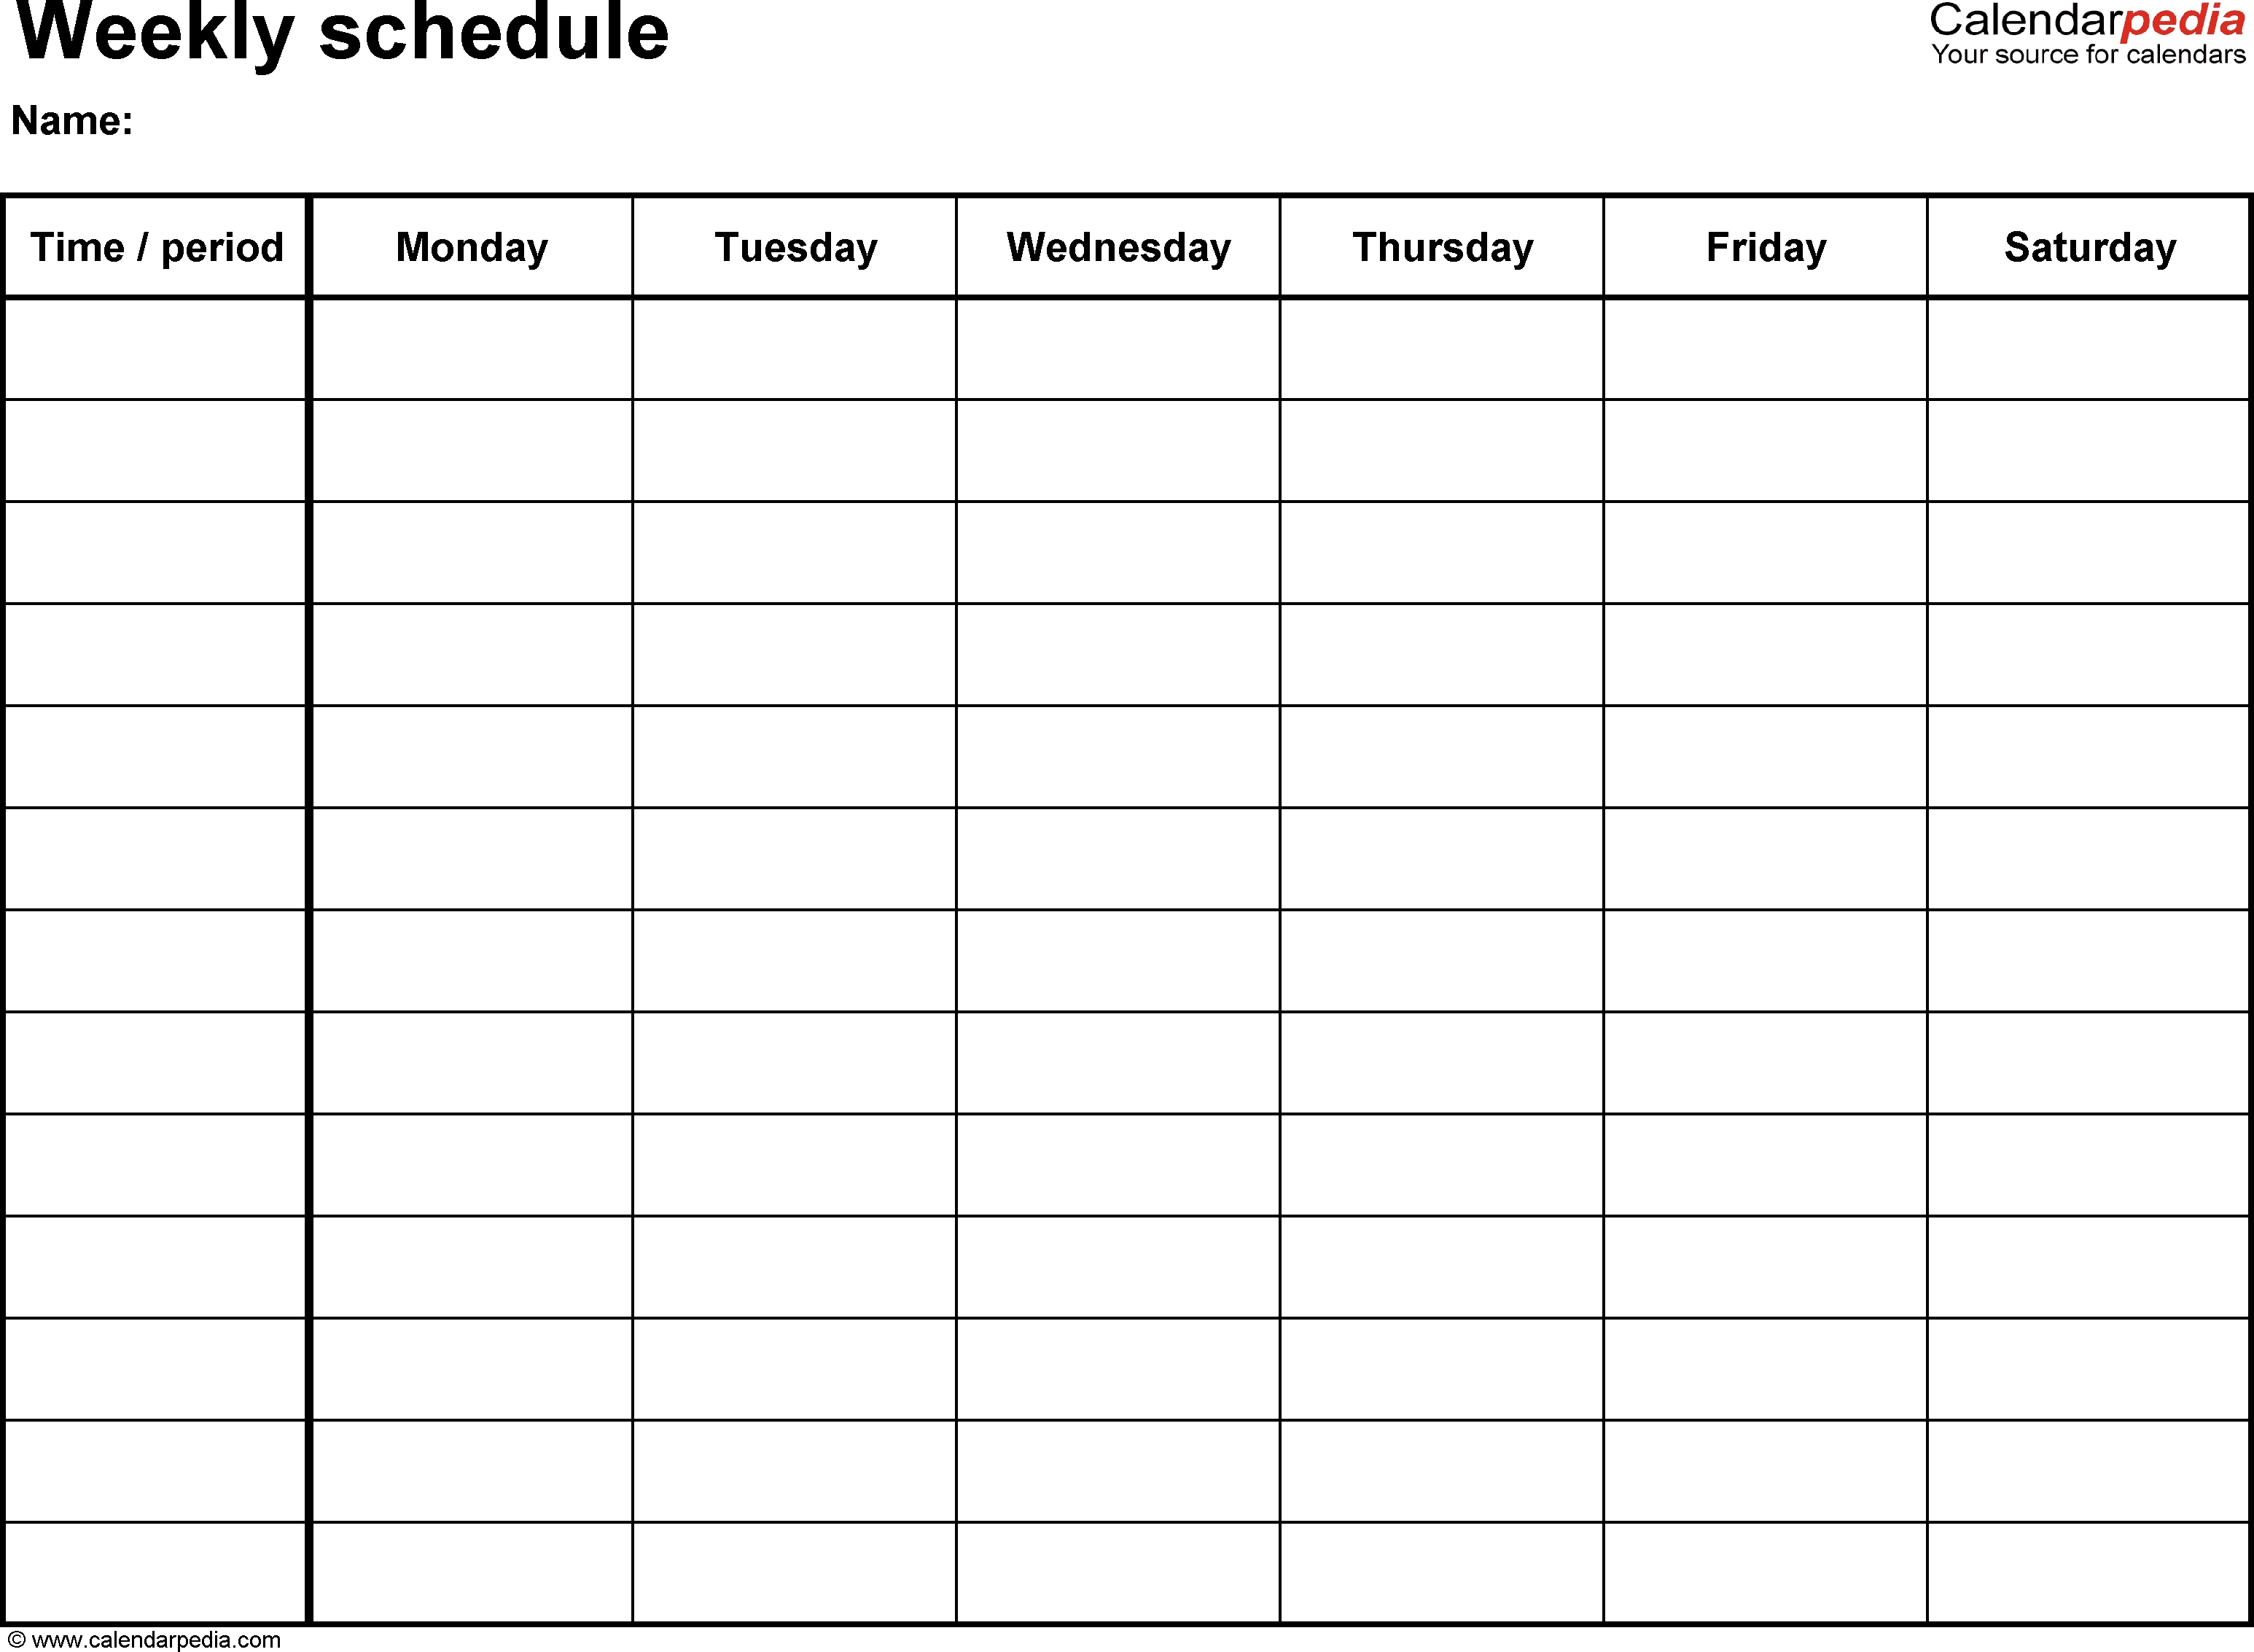 Free Weekly Schedule Templates For Word - 18 Templates for Free Monday Through Friday Calendar Template